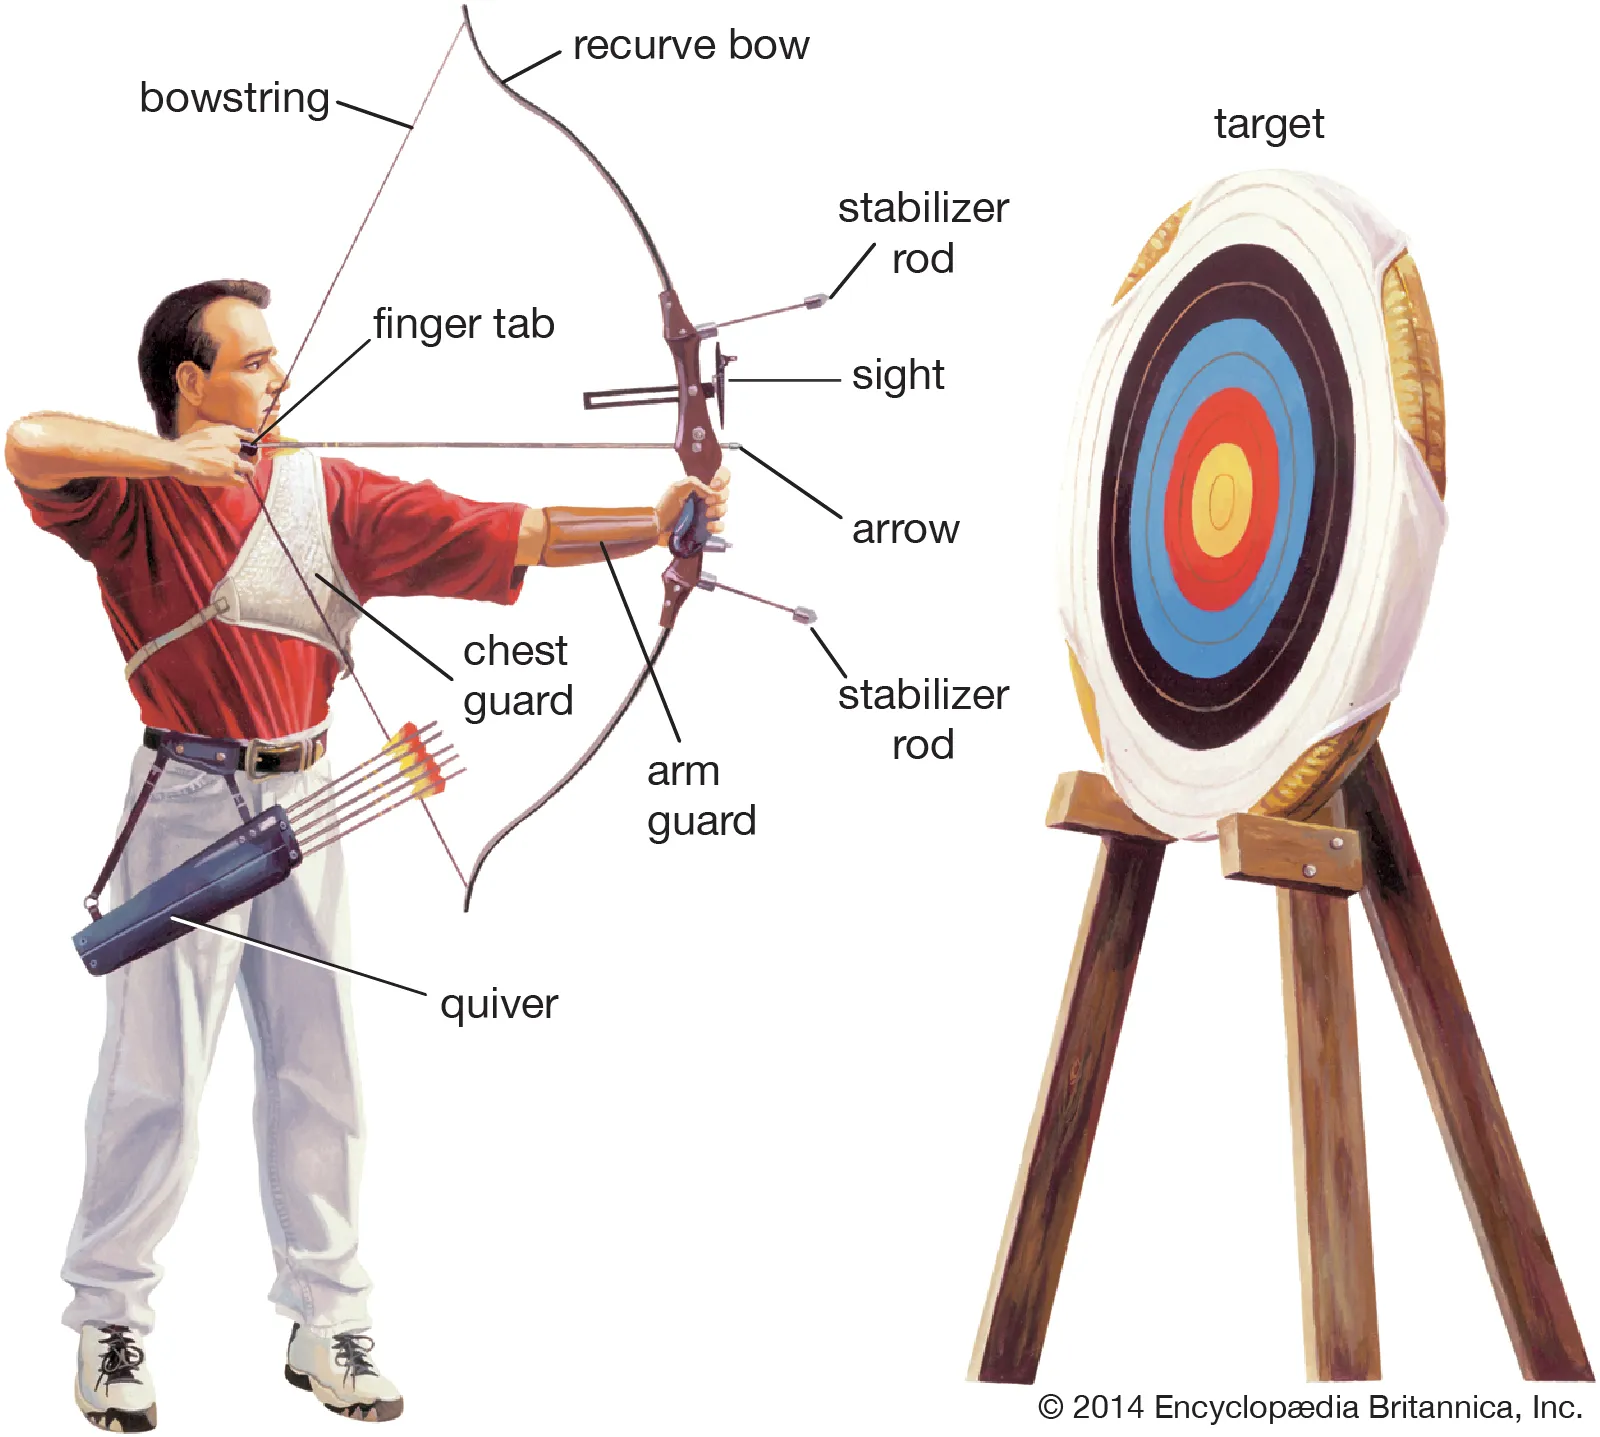 Beginner (Introduction to Archery)